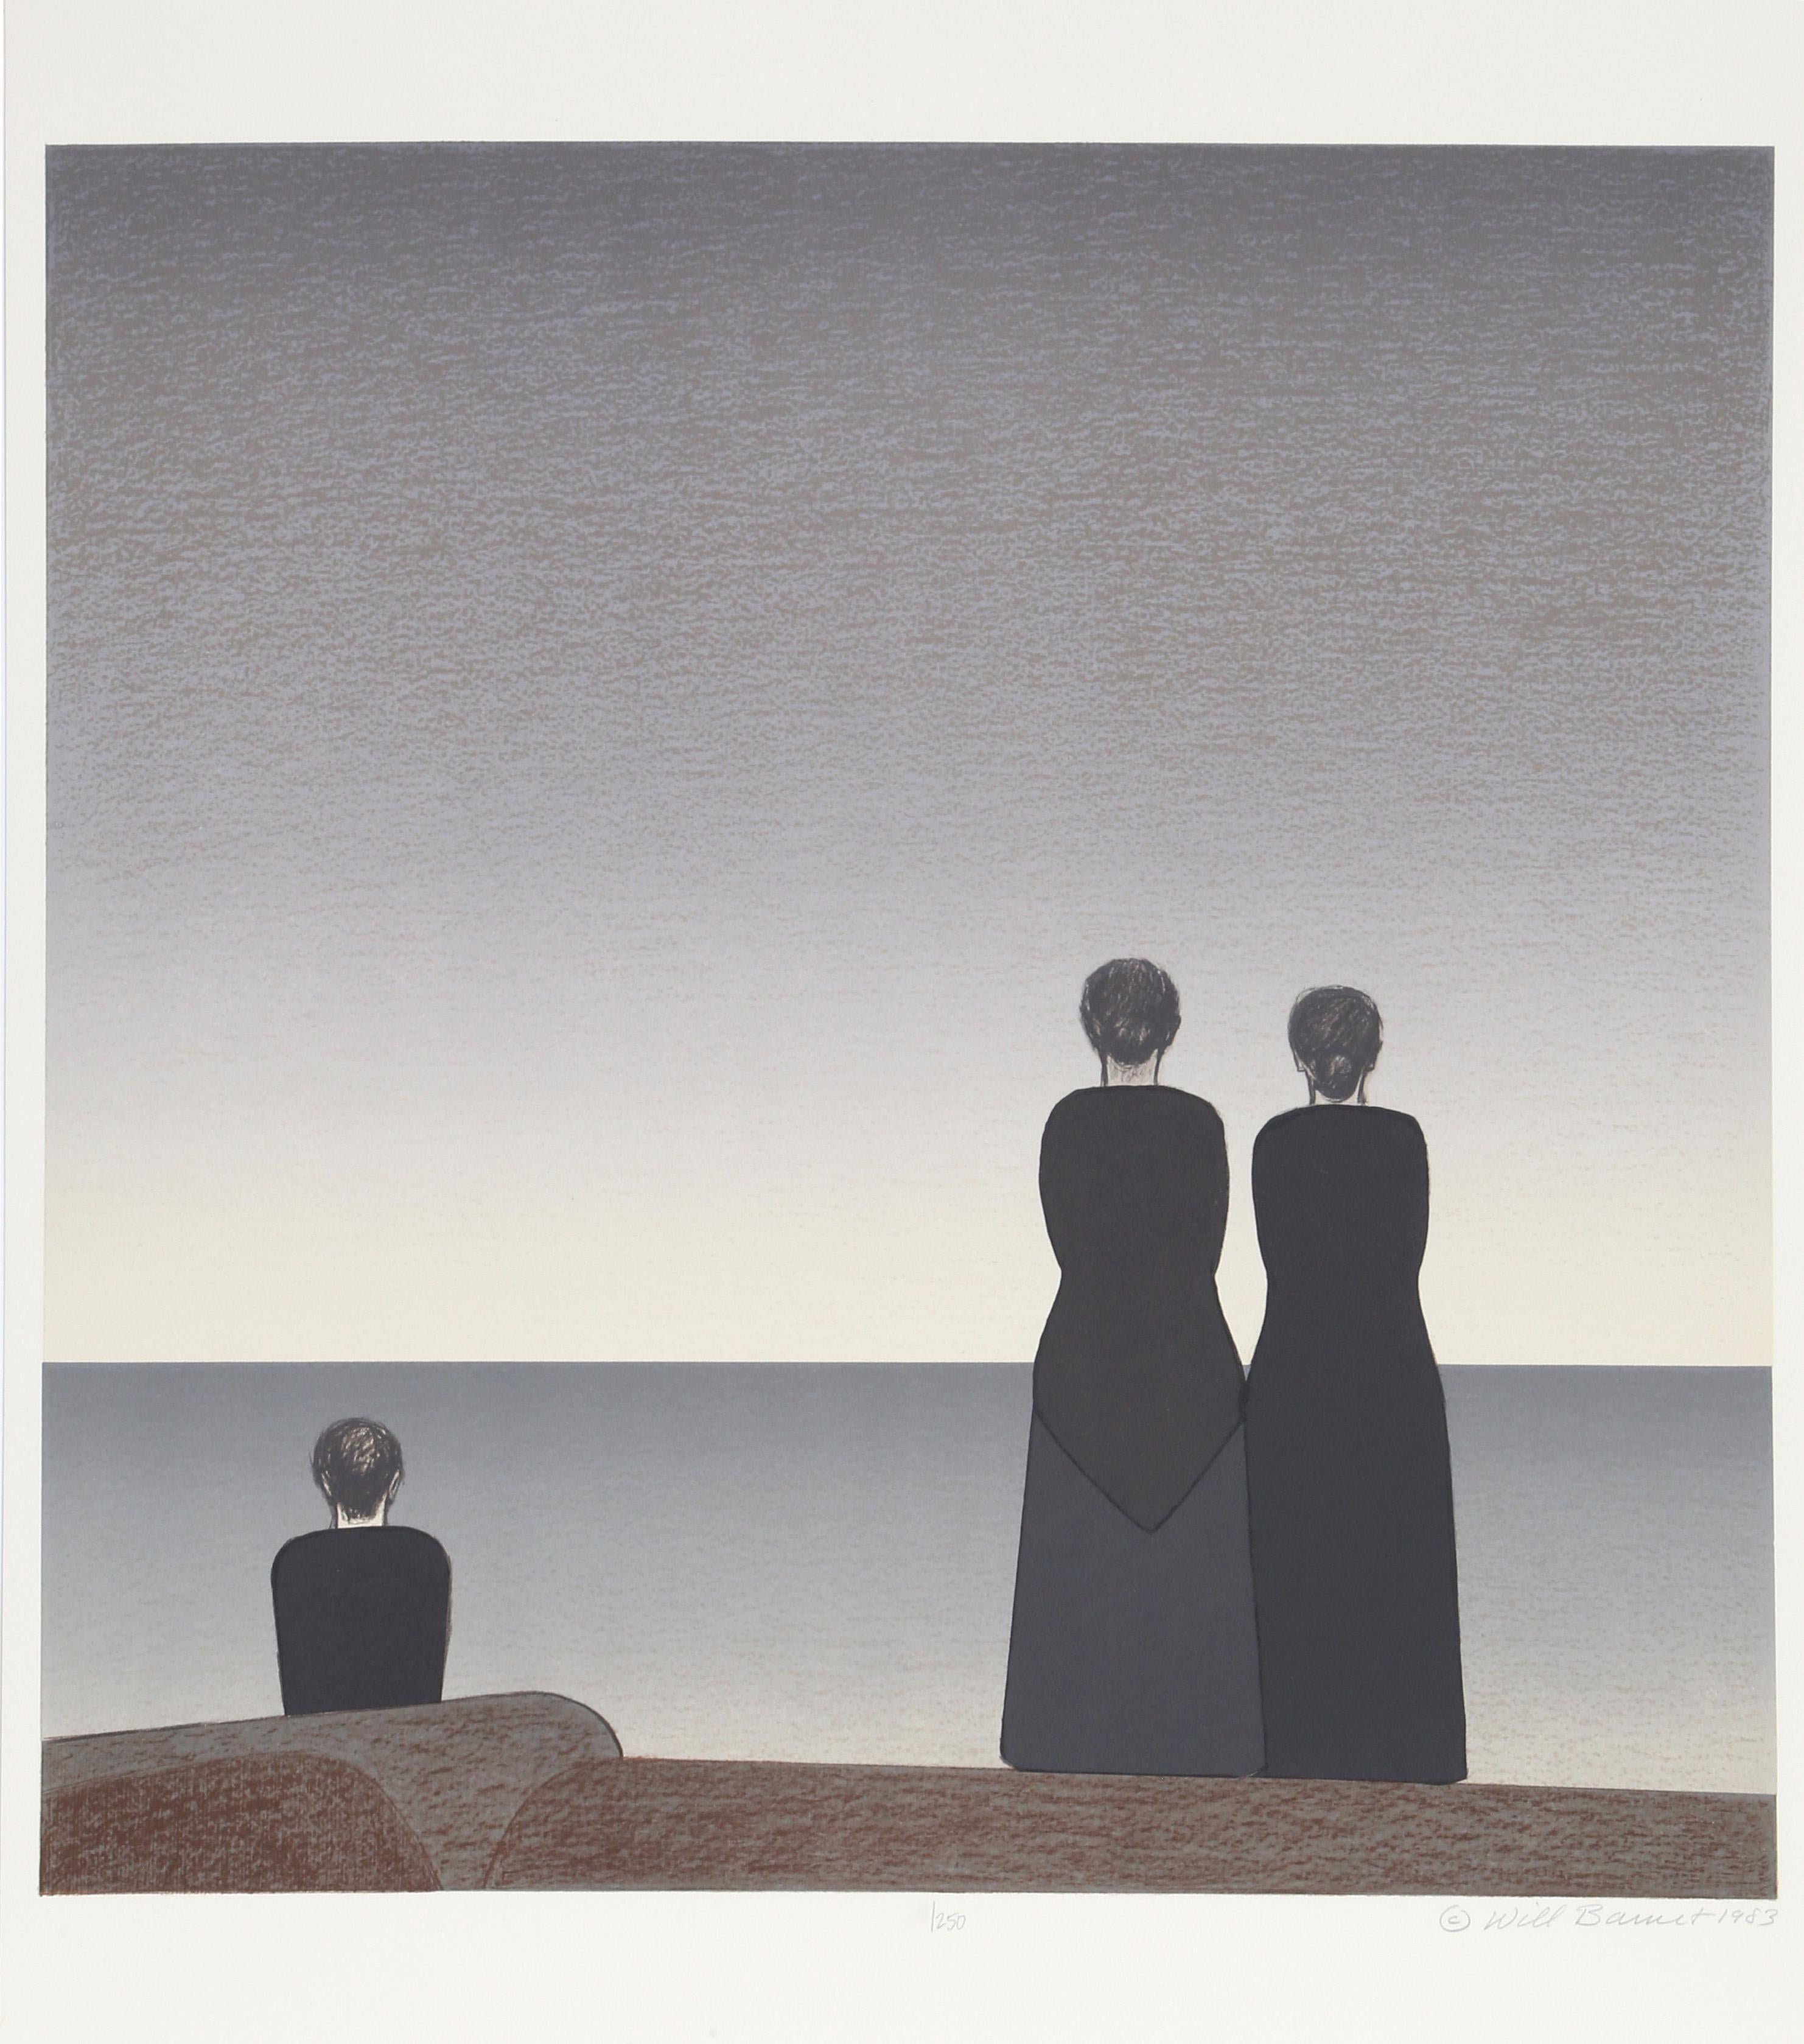 Artist: Will Barnet (American, 1911-2012)
Title: Peter Grimes
Year: 1983
Medium: Color Lithograph, signed and numbered in pencil
Edition: of 250
Image Size: 21 x 21 inches
Size: 30  x 22 in. (76.2  x 55.88 cm)

From the Metropolitan Opera Fine Art